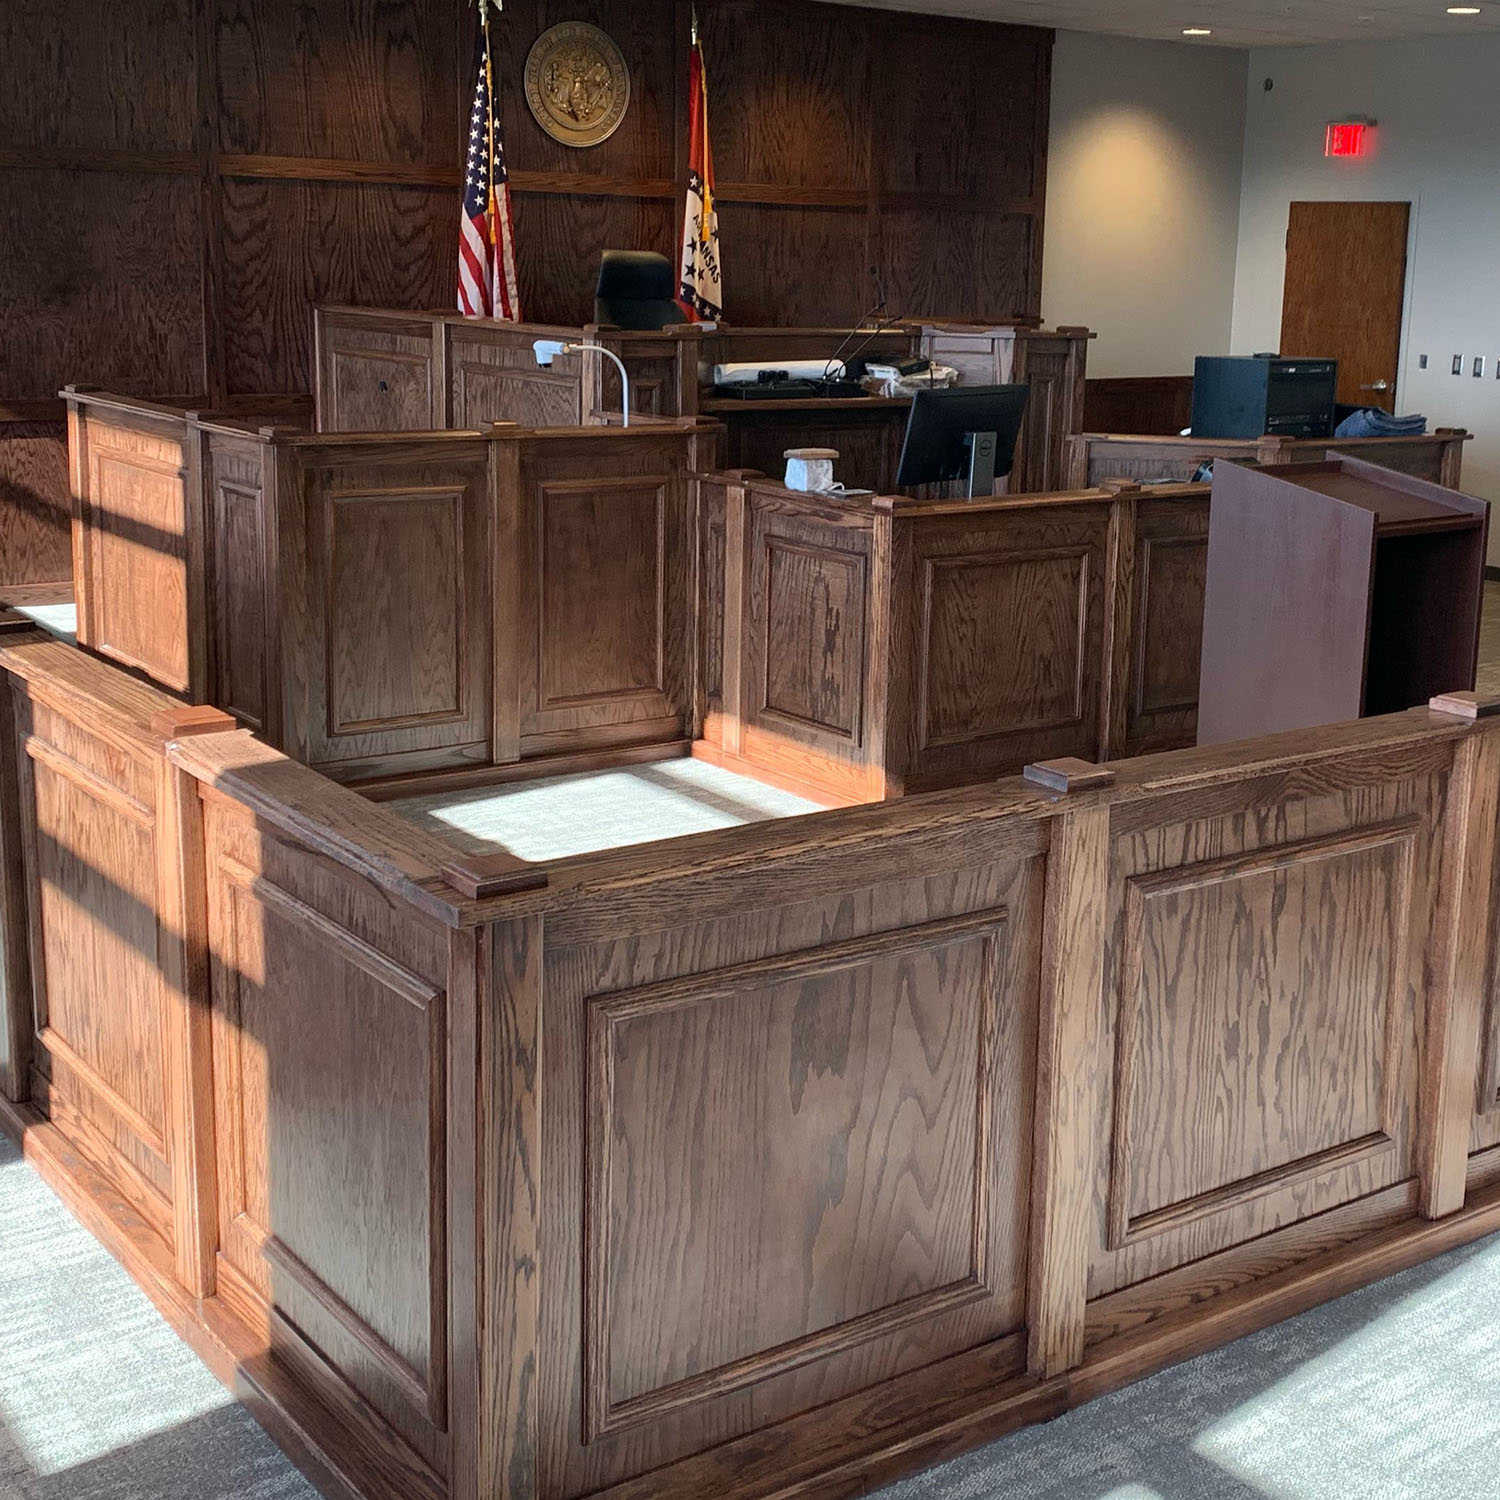 Know the News - Should Benton County sell buildings that hold courtrooms?